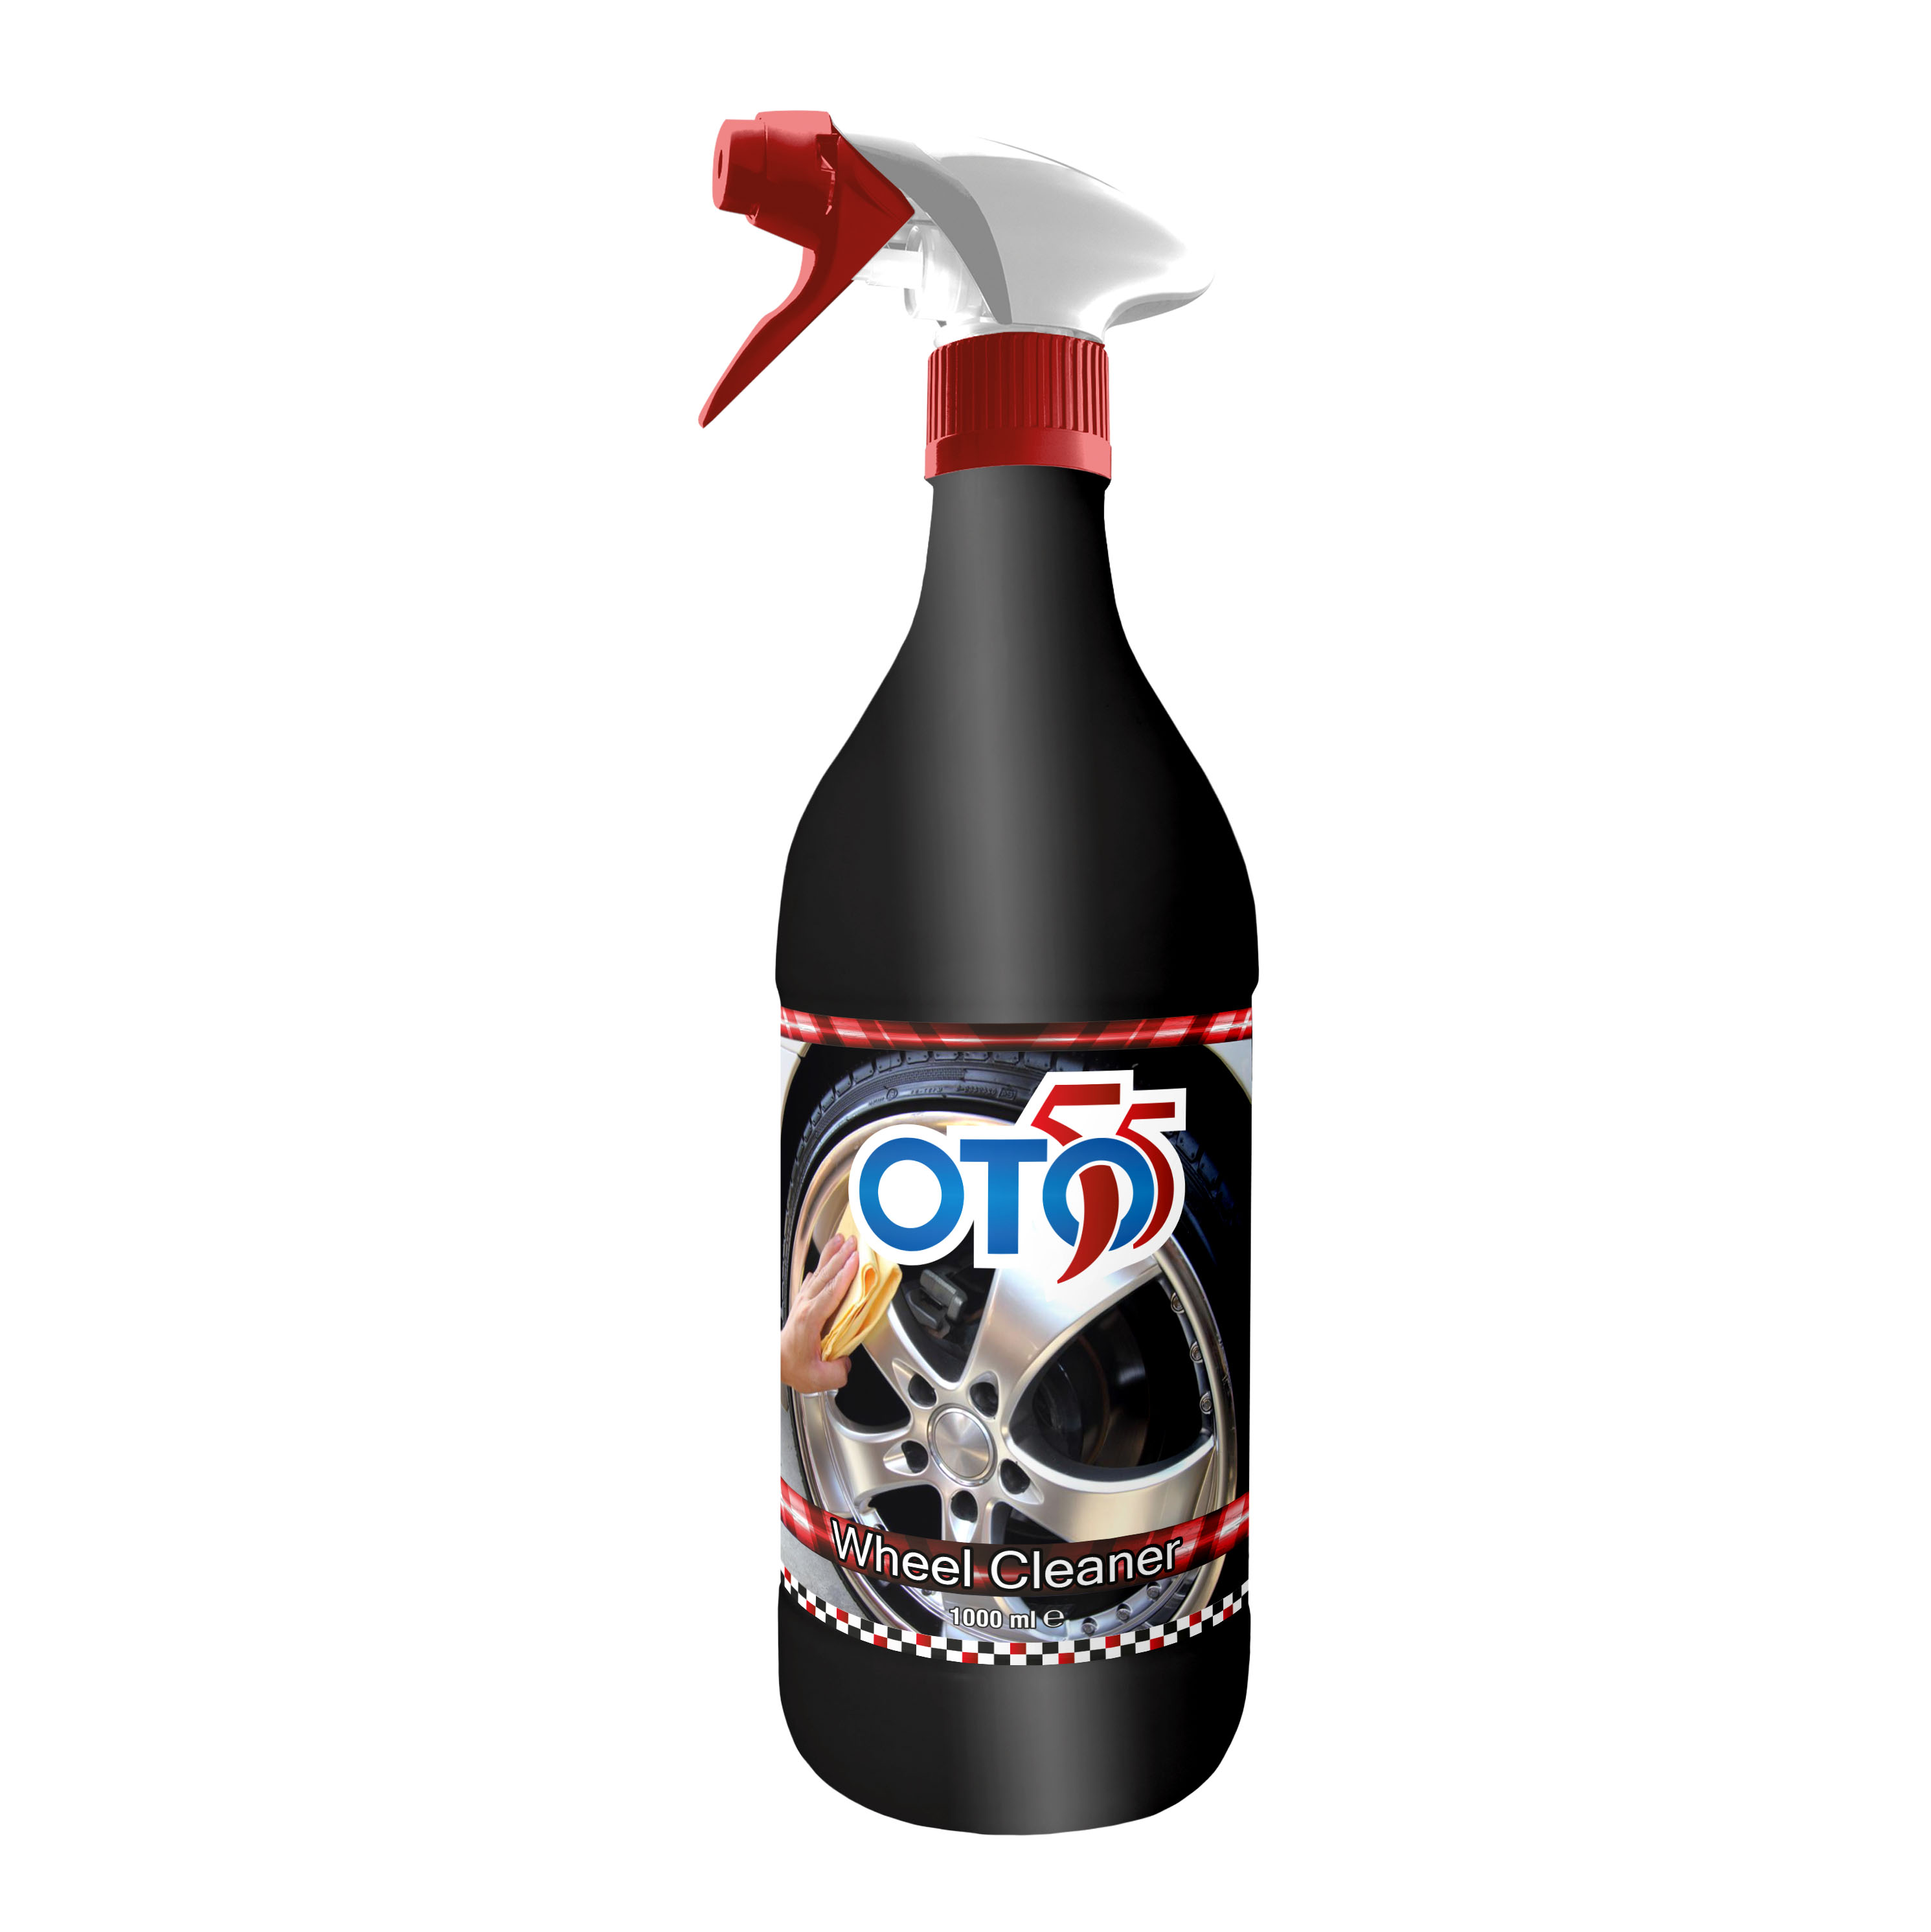 Tire Rim Cleaning 1000 ml